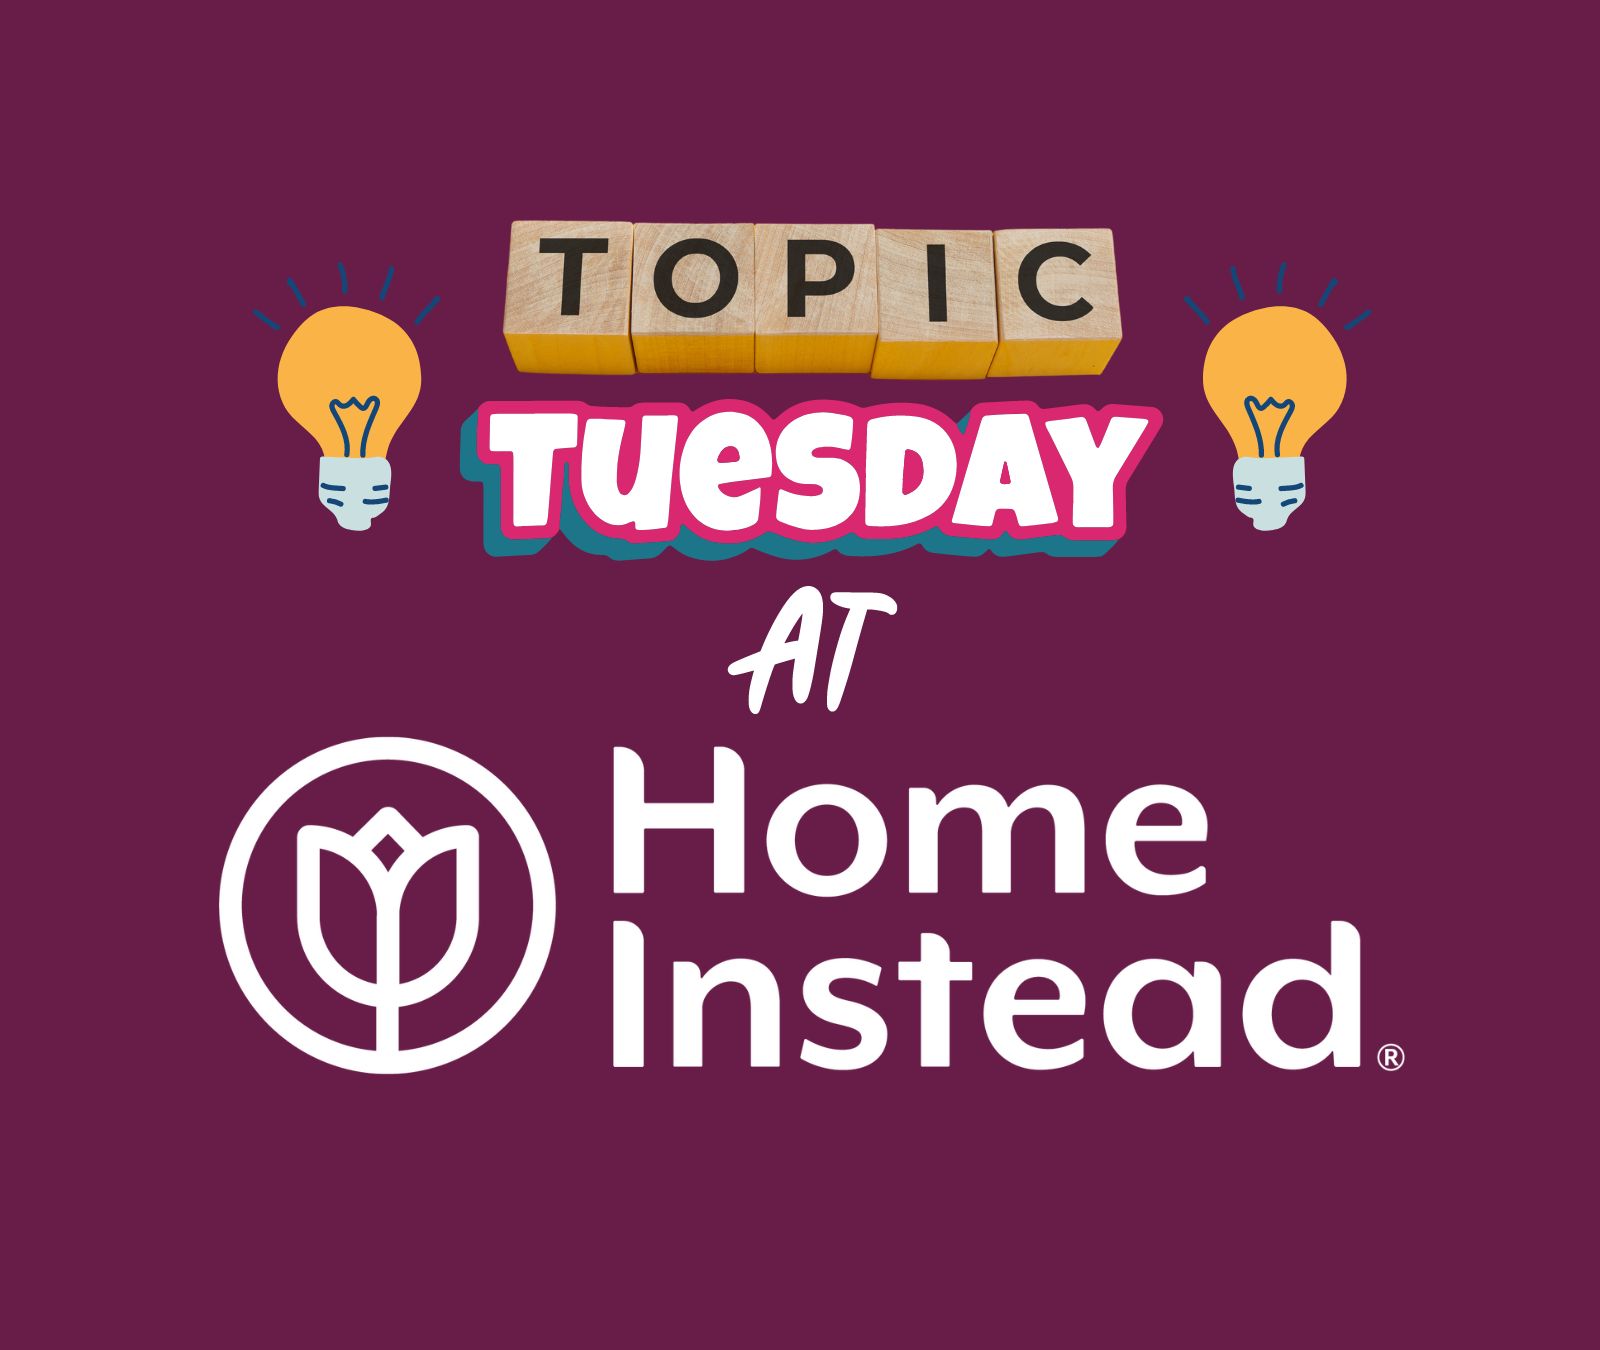 Topic Tuesday Page hero